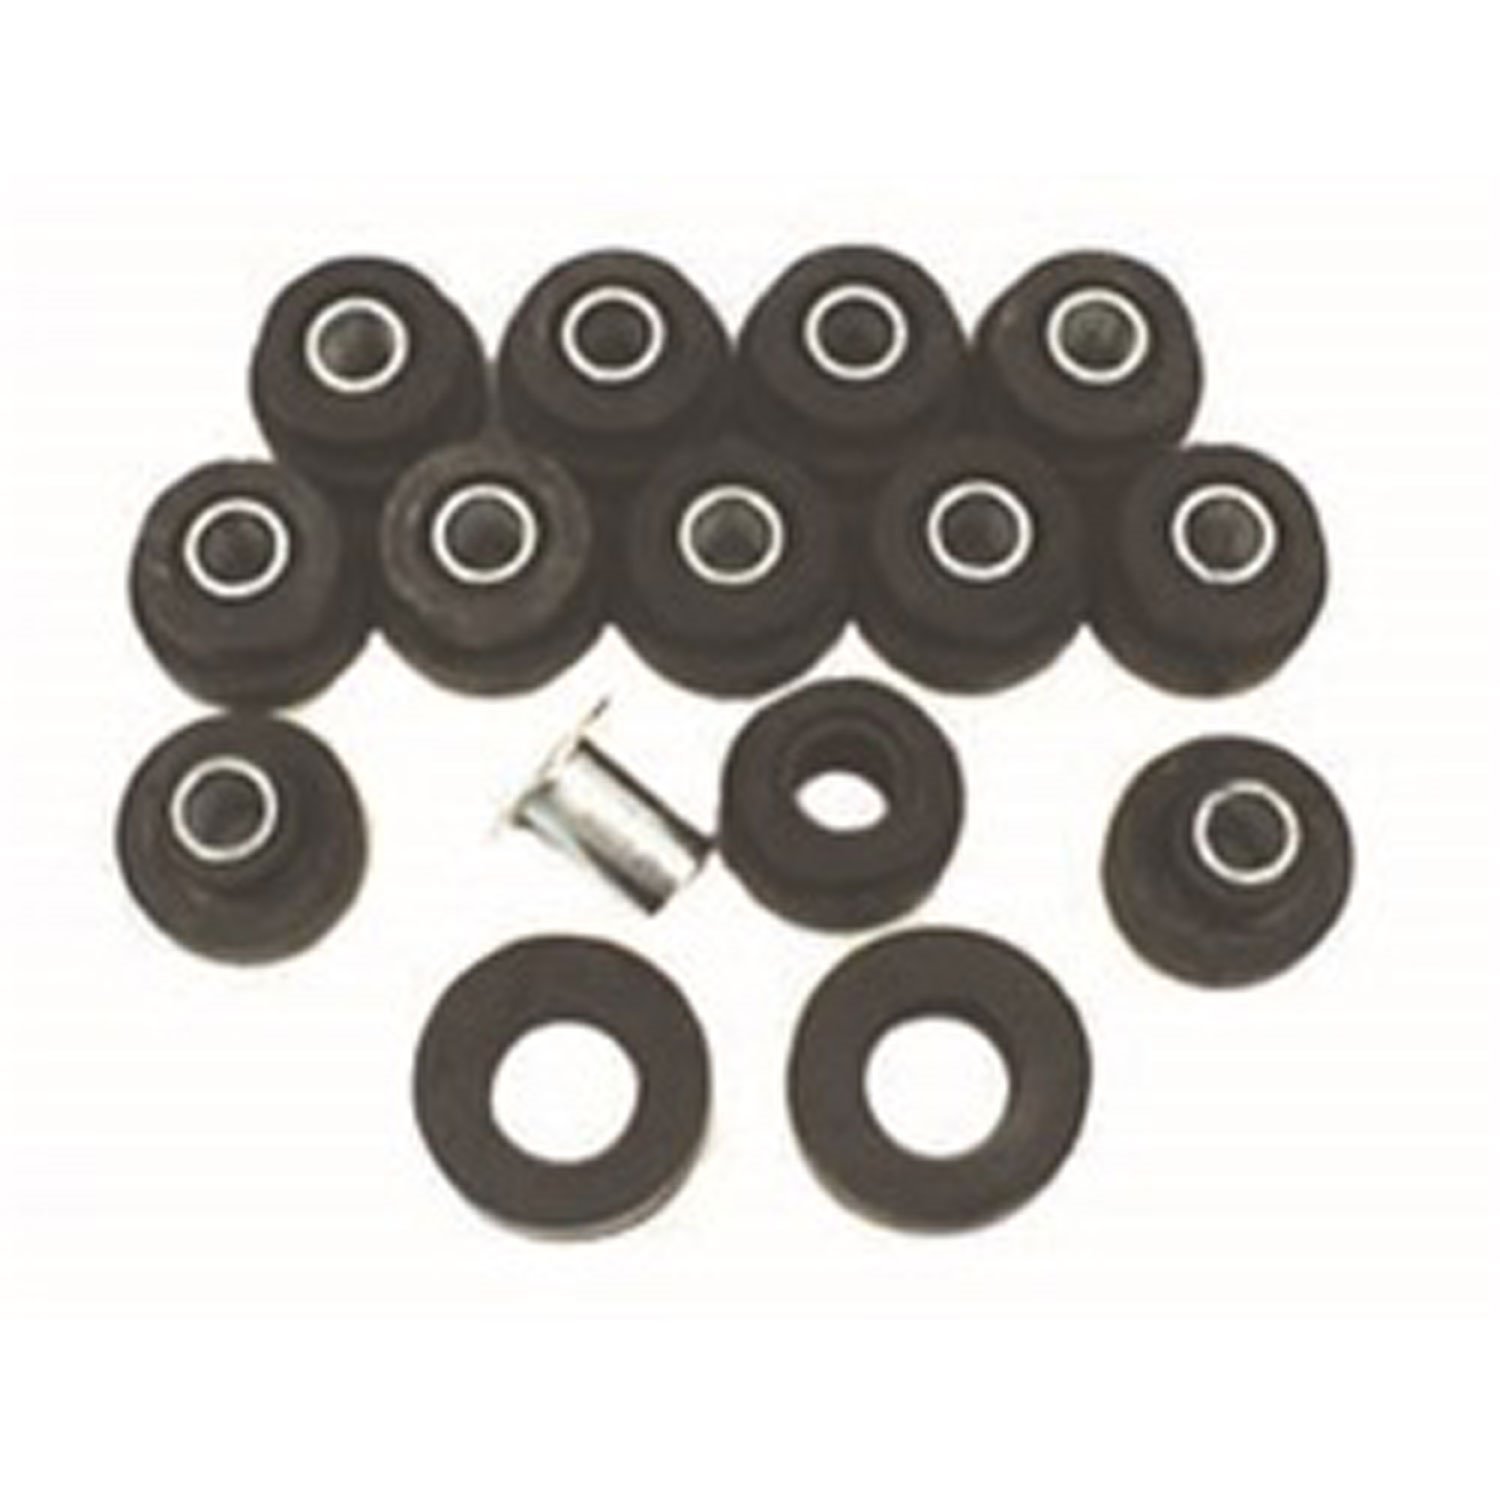 This factory-style body tub mounting kit from Omix-ADA fits 76-86 Jeep CJ models.